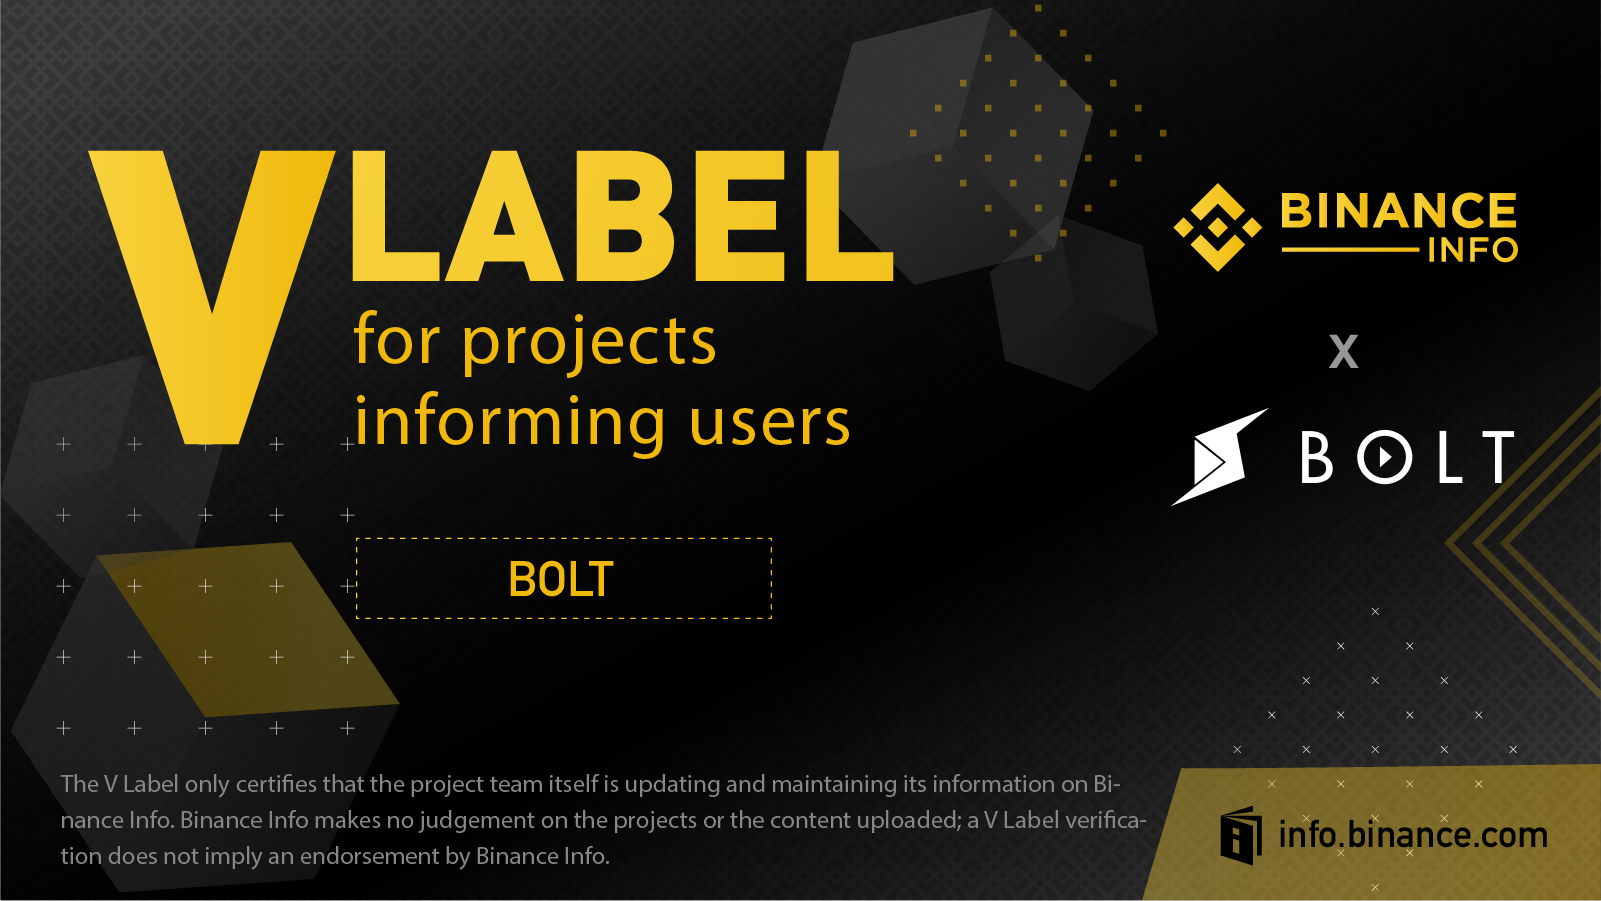 BOLT has officially joined Binance Info’s transparency ...